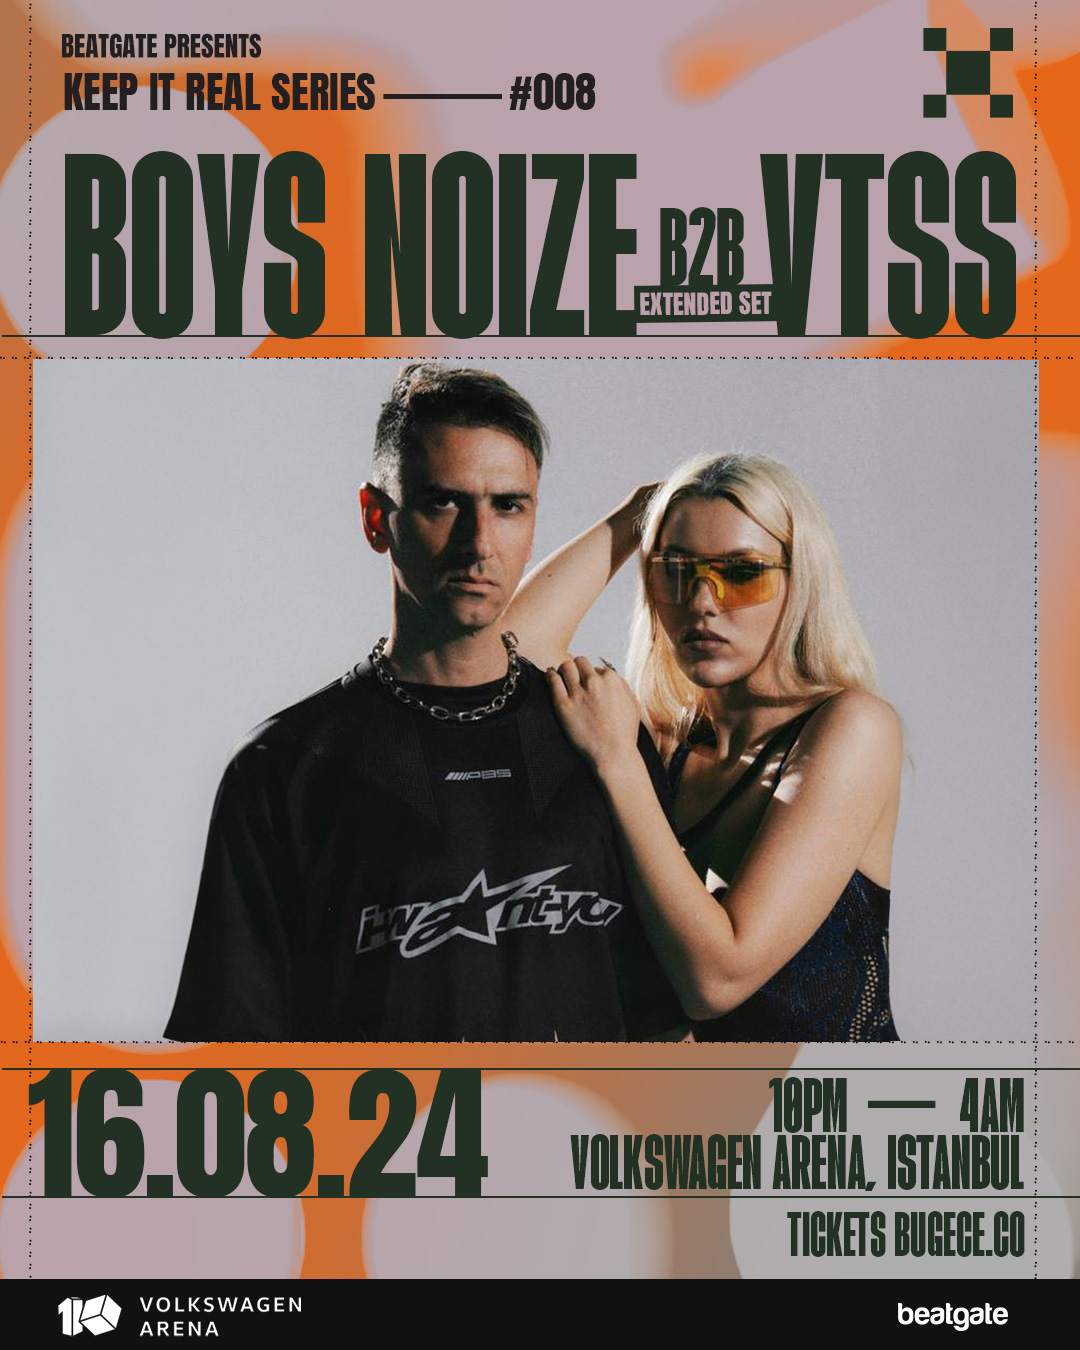 Beatgate with Boys Noize b2b VTSS  - Keep It Real Series #008 - フライヤー裏